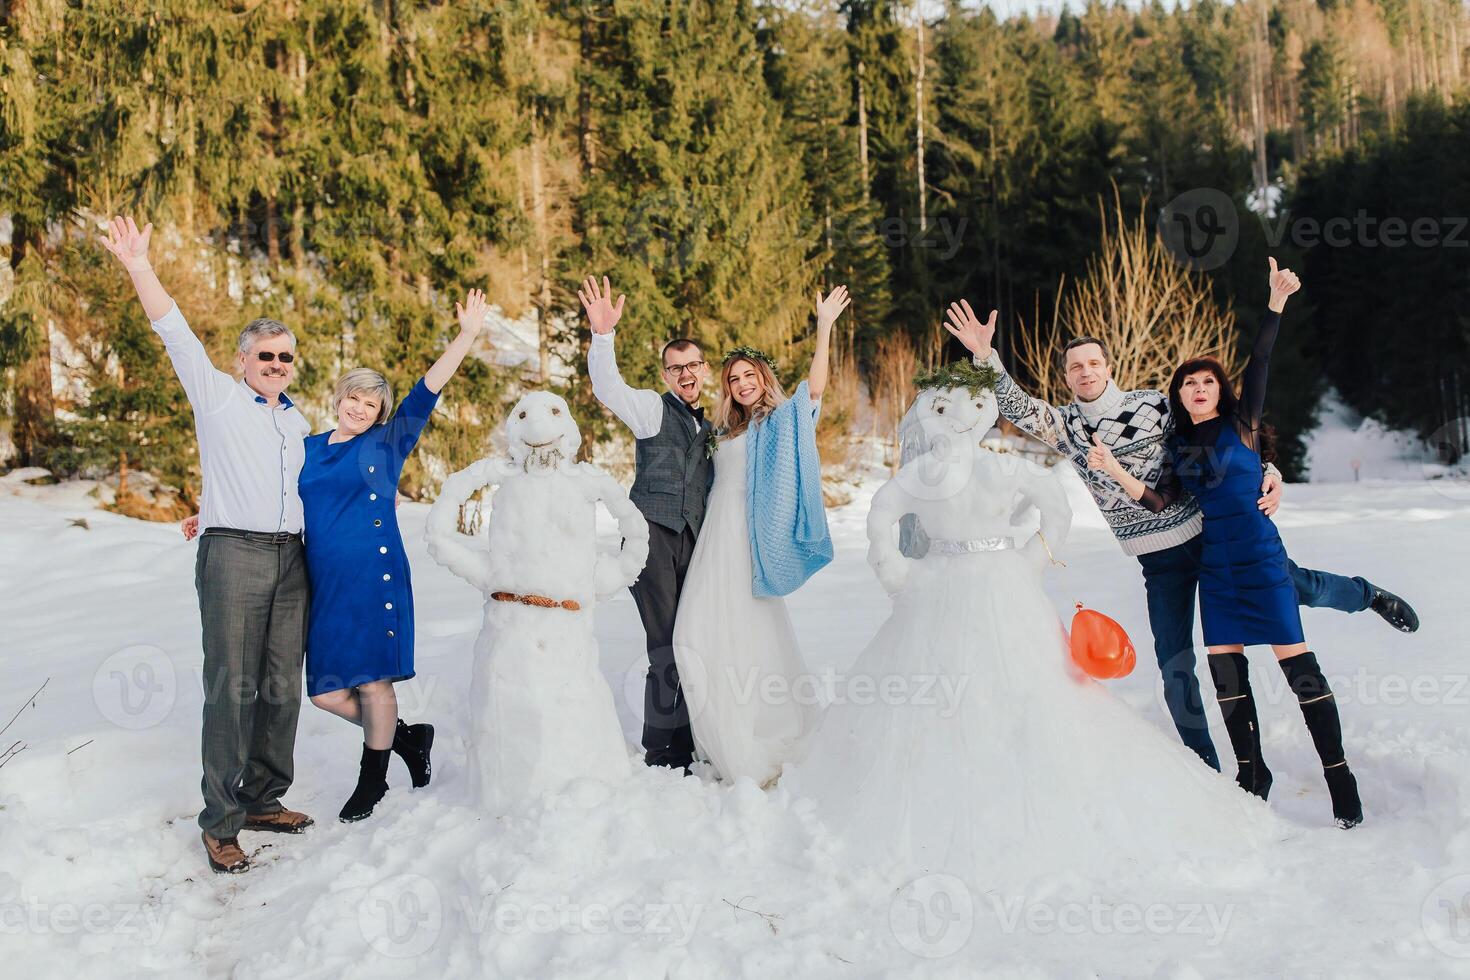 The bride and groom made snowmen with their parents. Adults also know how to have fun. Wedding in winter against the background of a pine forest. photo